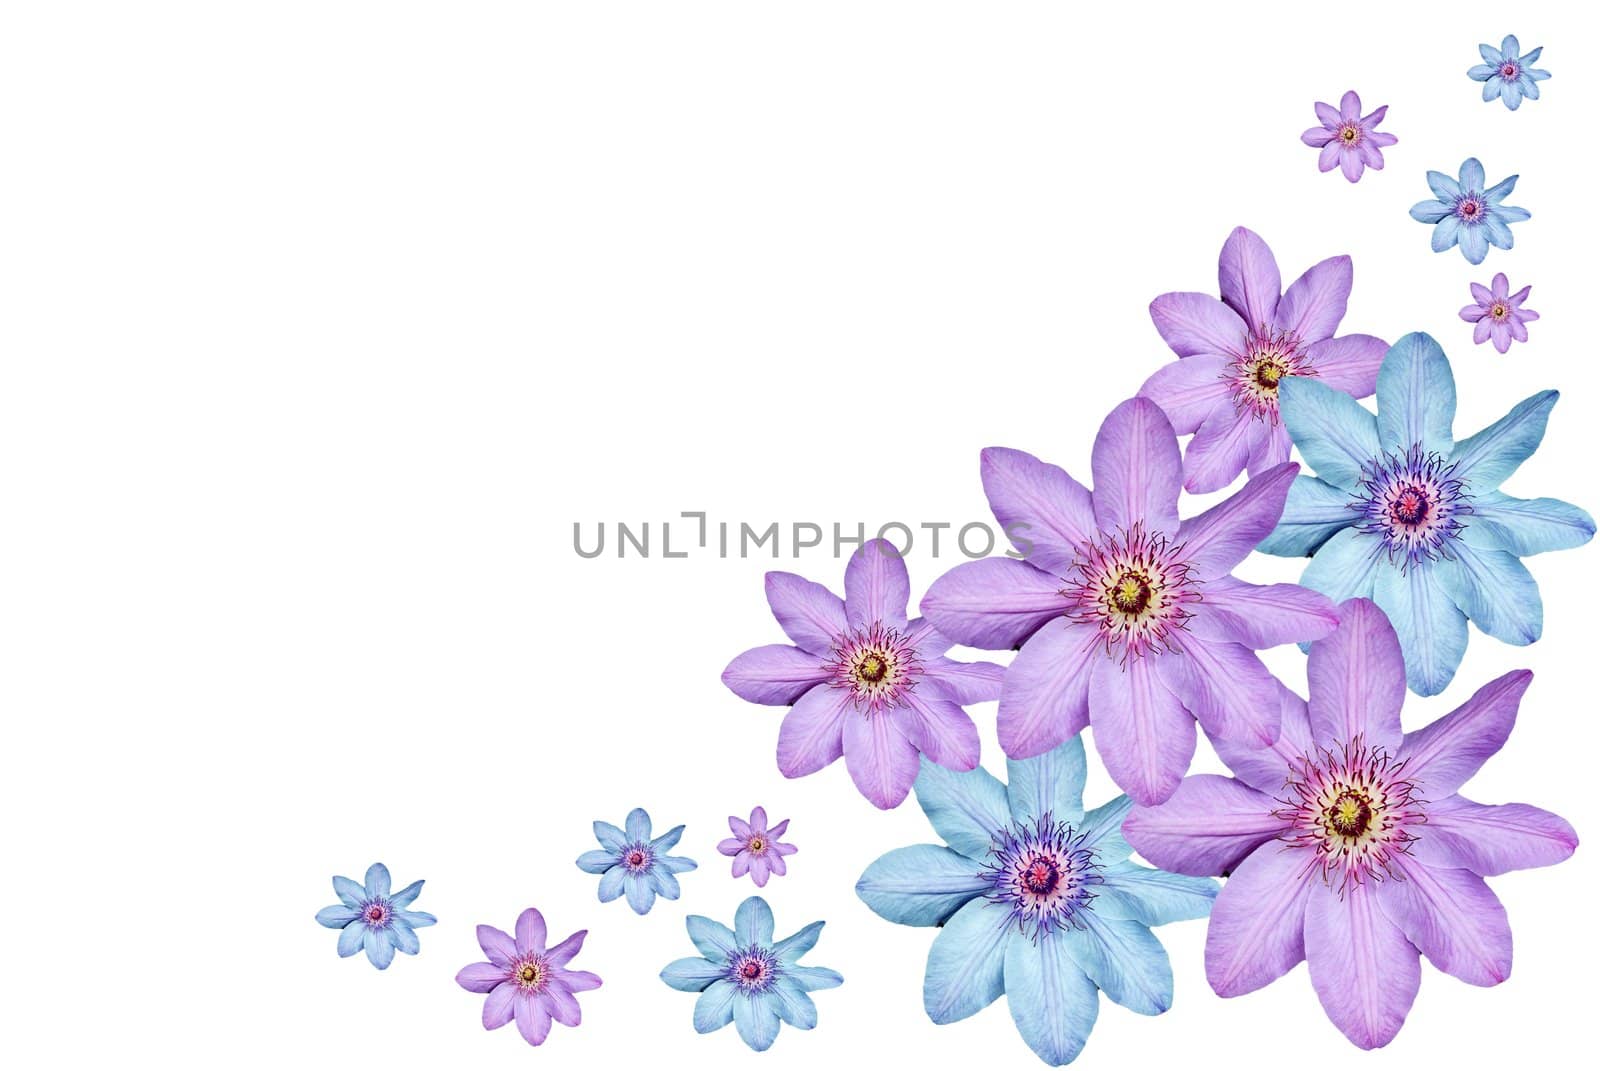 Montage of a Clematis flower heads on a background of white